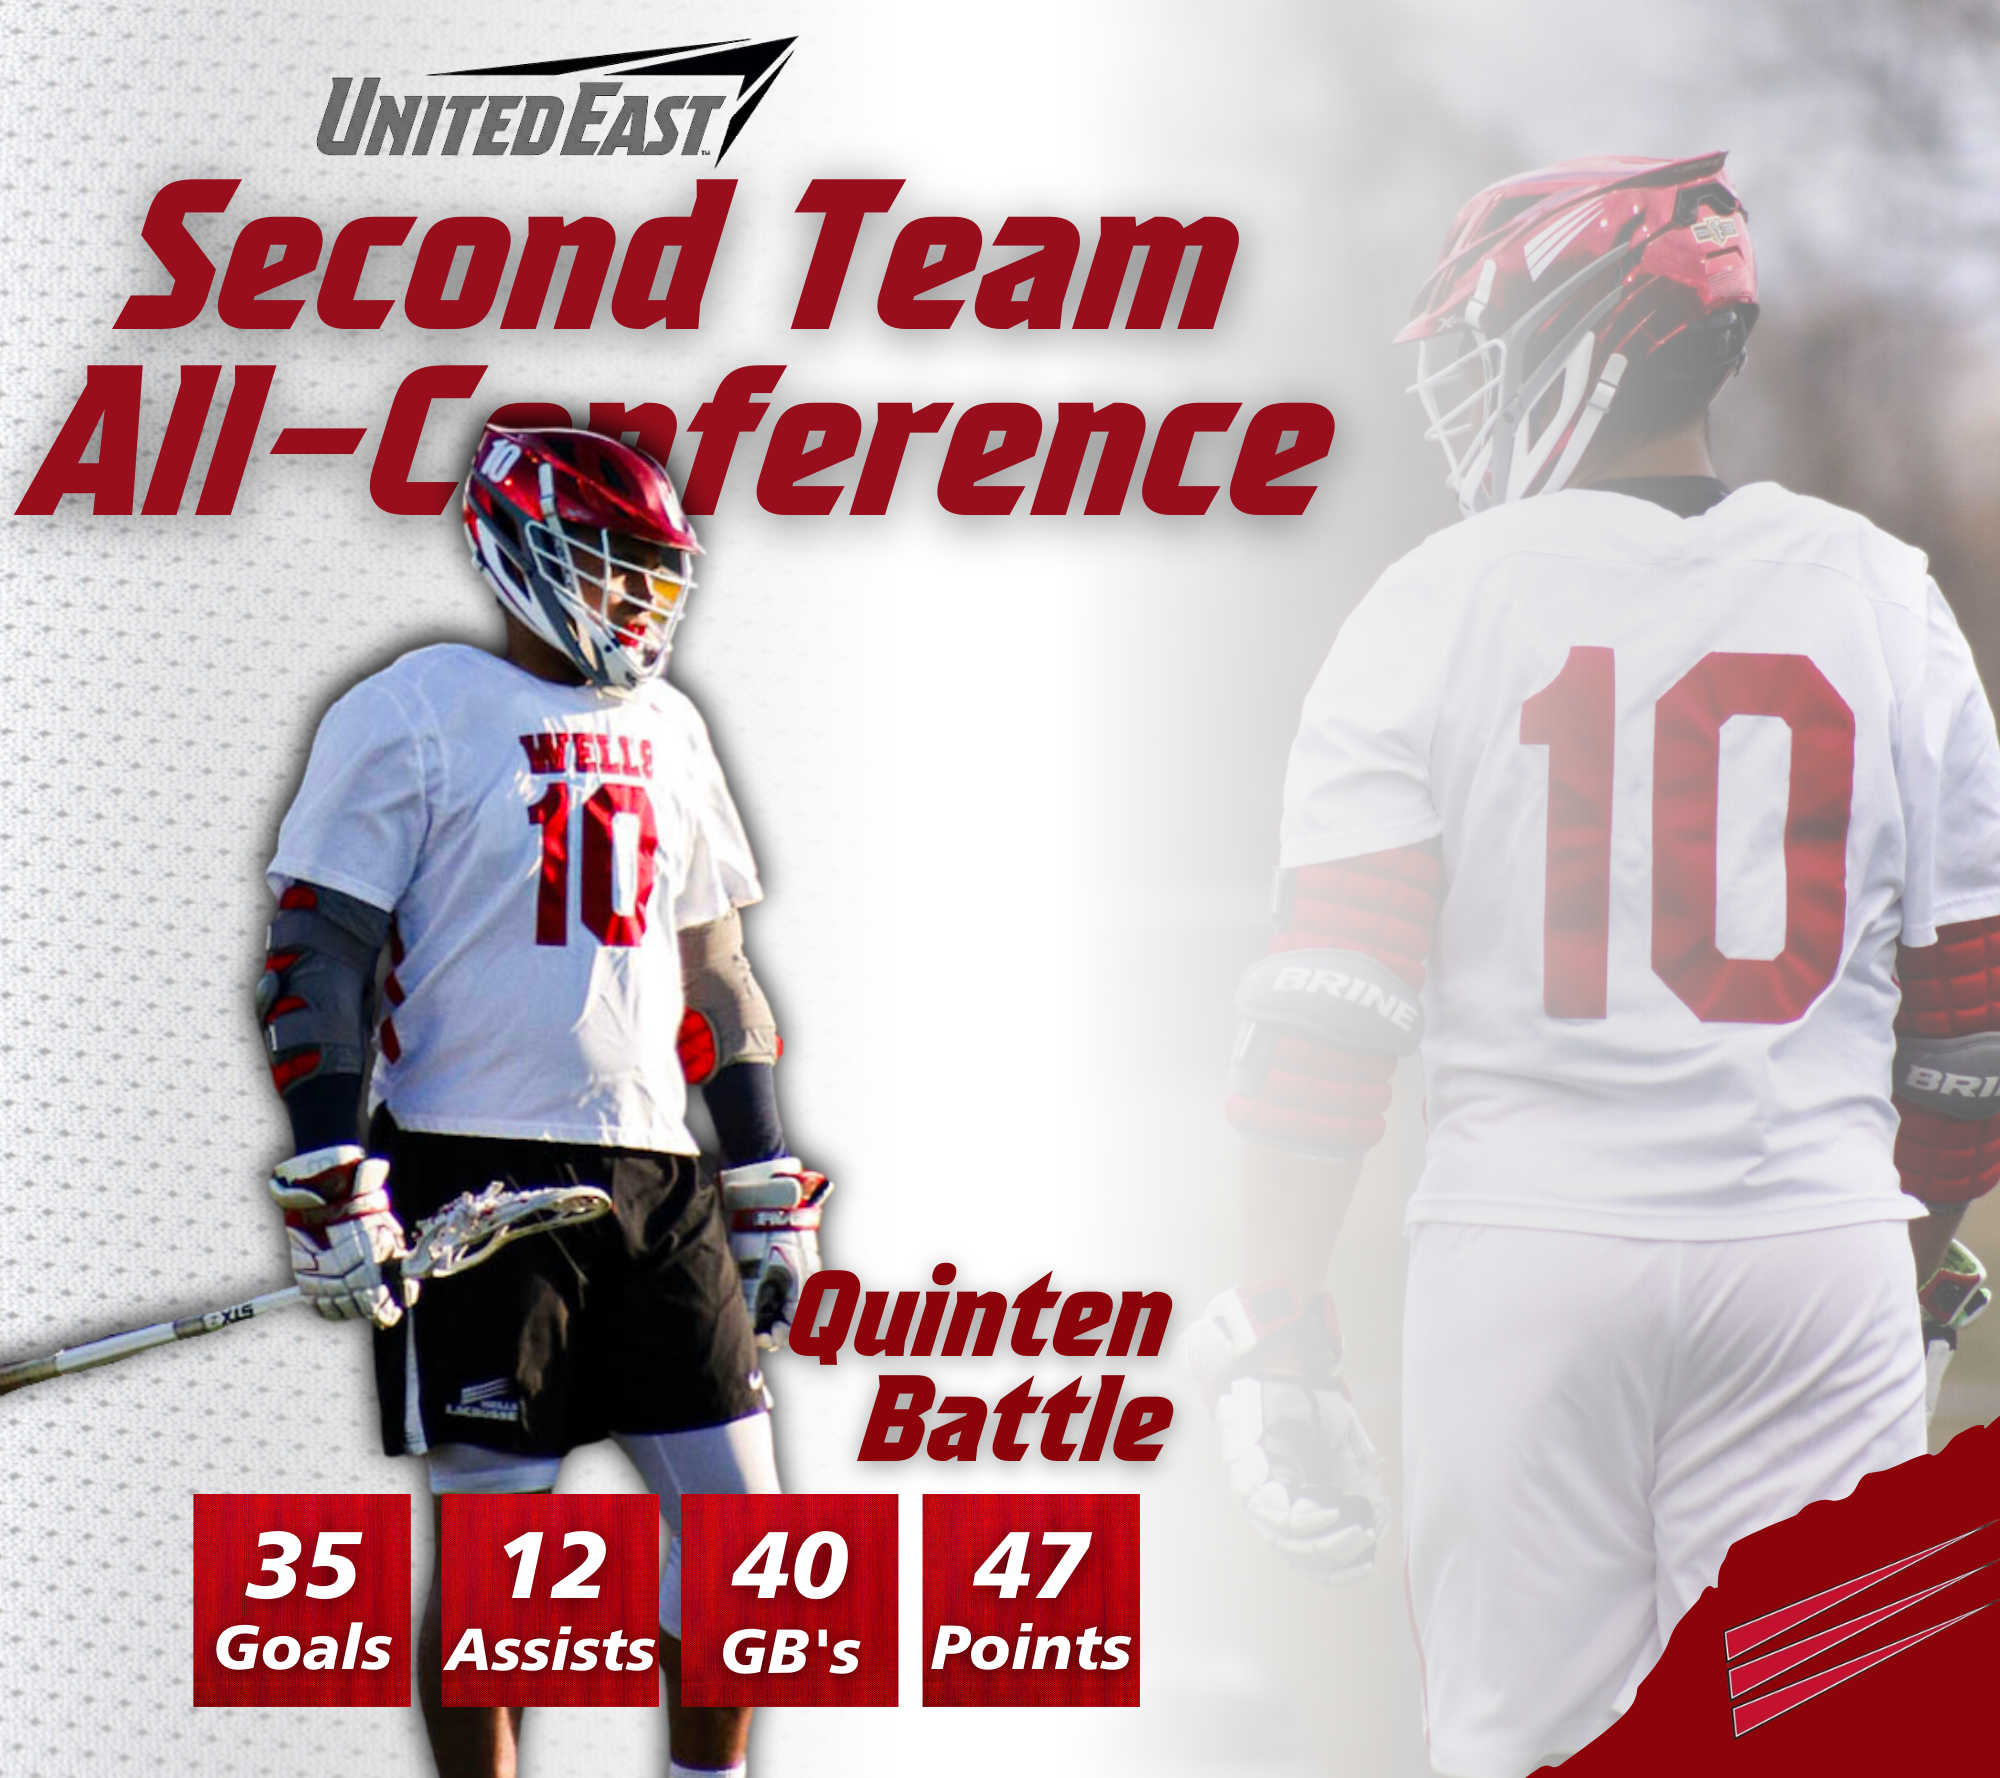 Battle Named To All-Conference team!